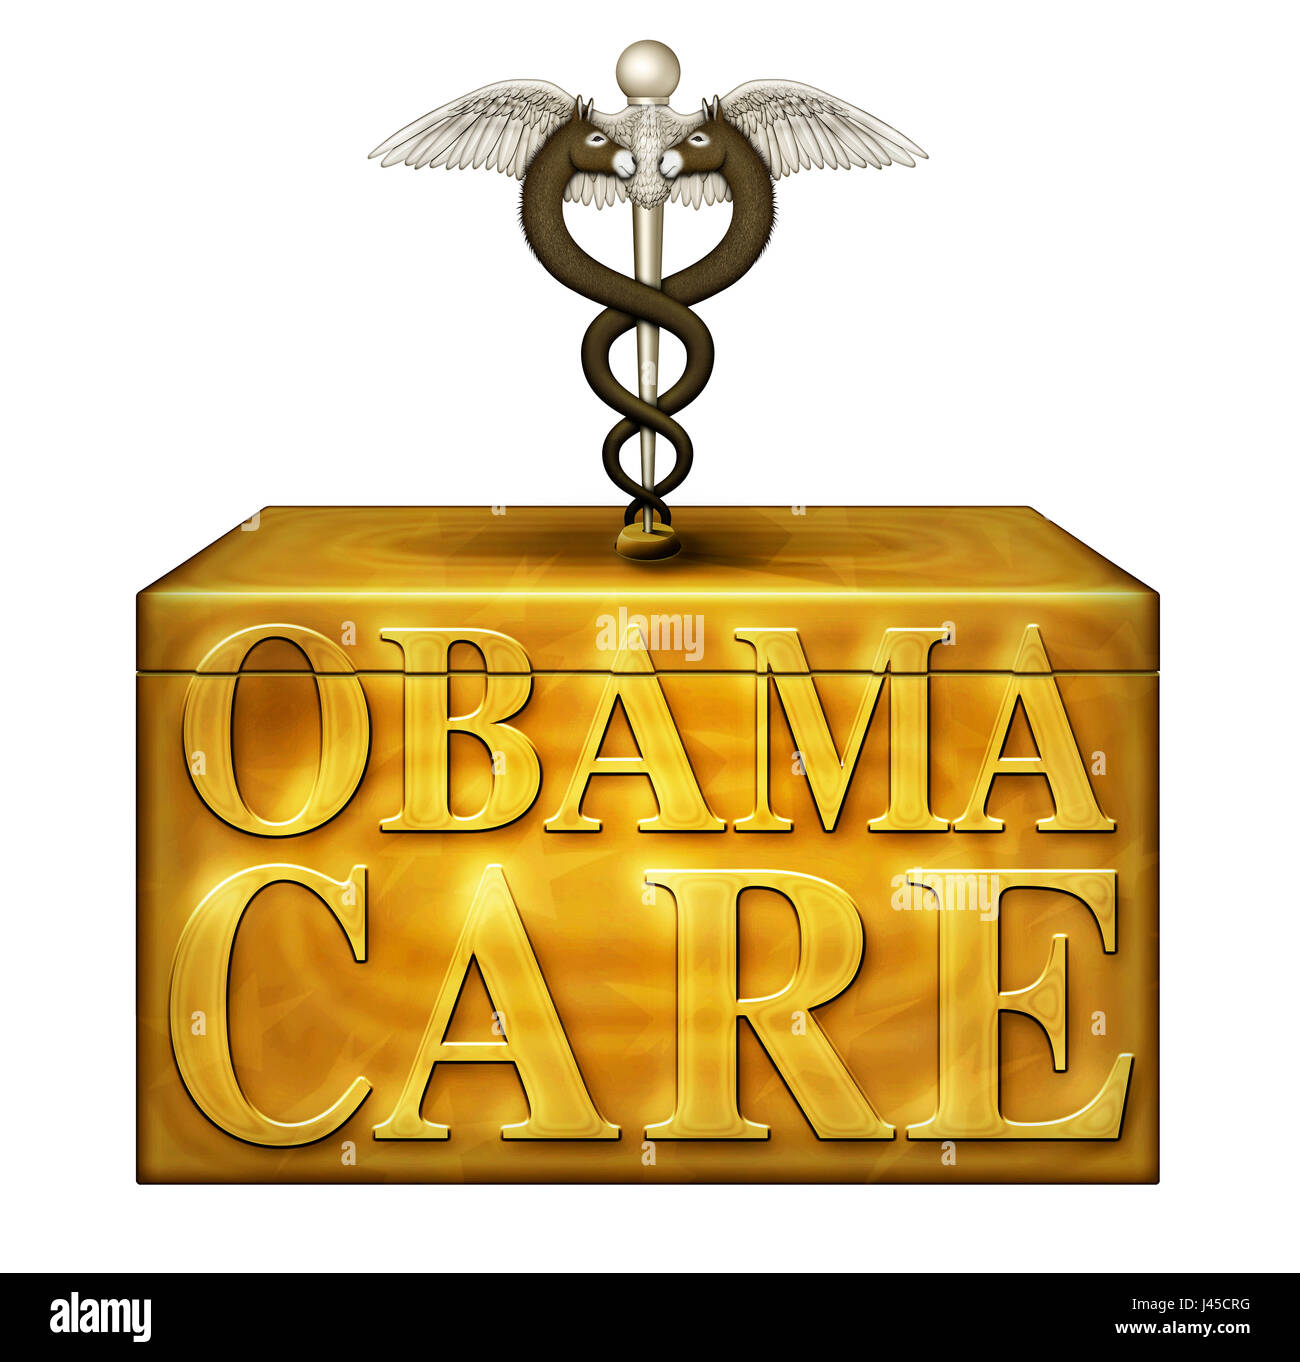 A Golden Box Labeled Obamacare With A Caduceus A Symbol Of